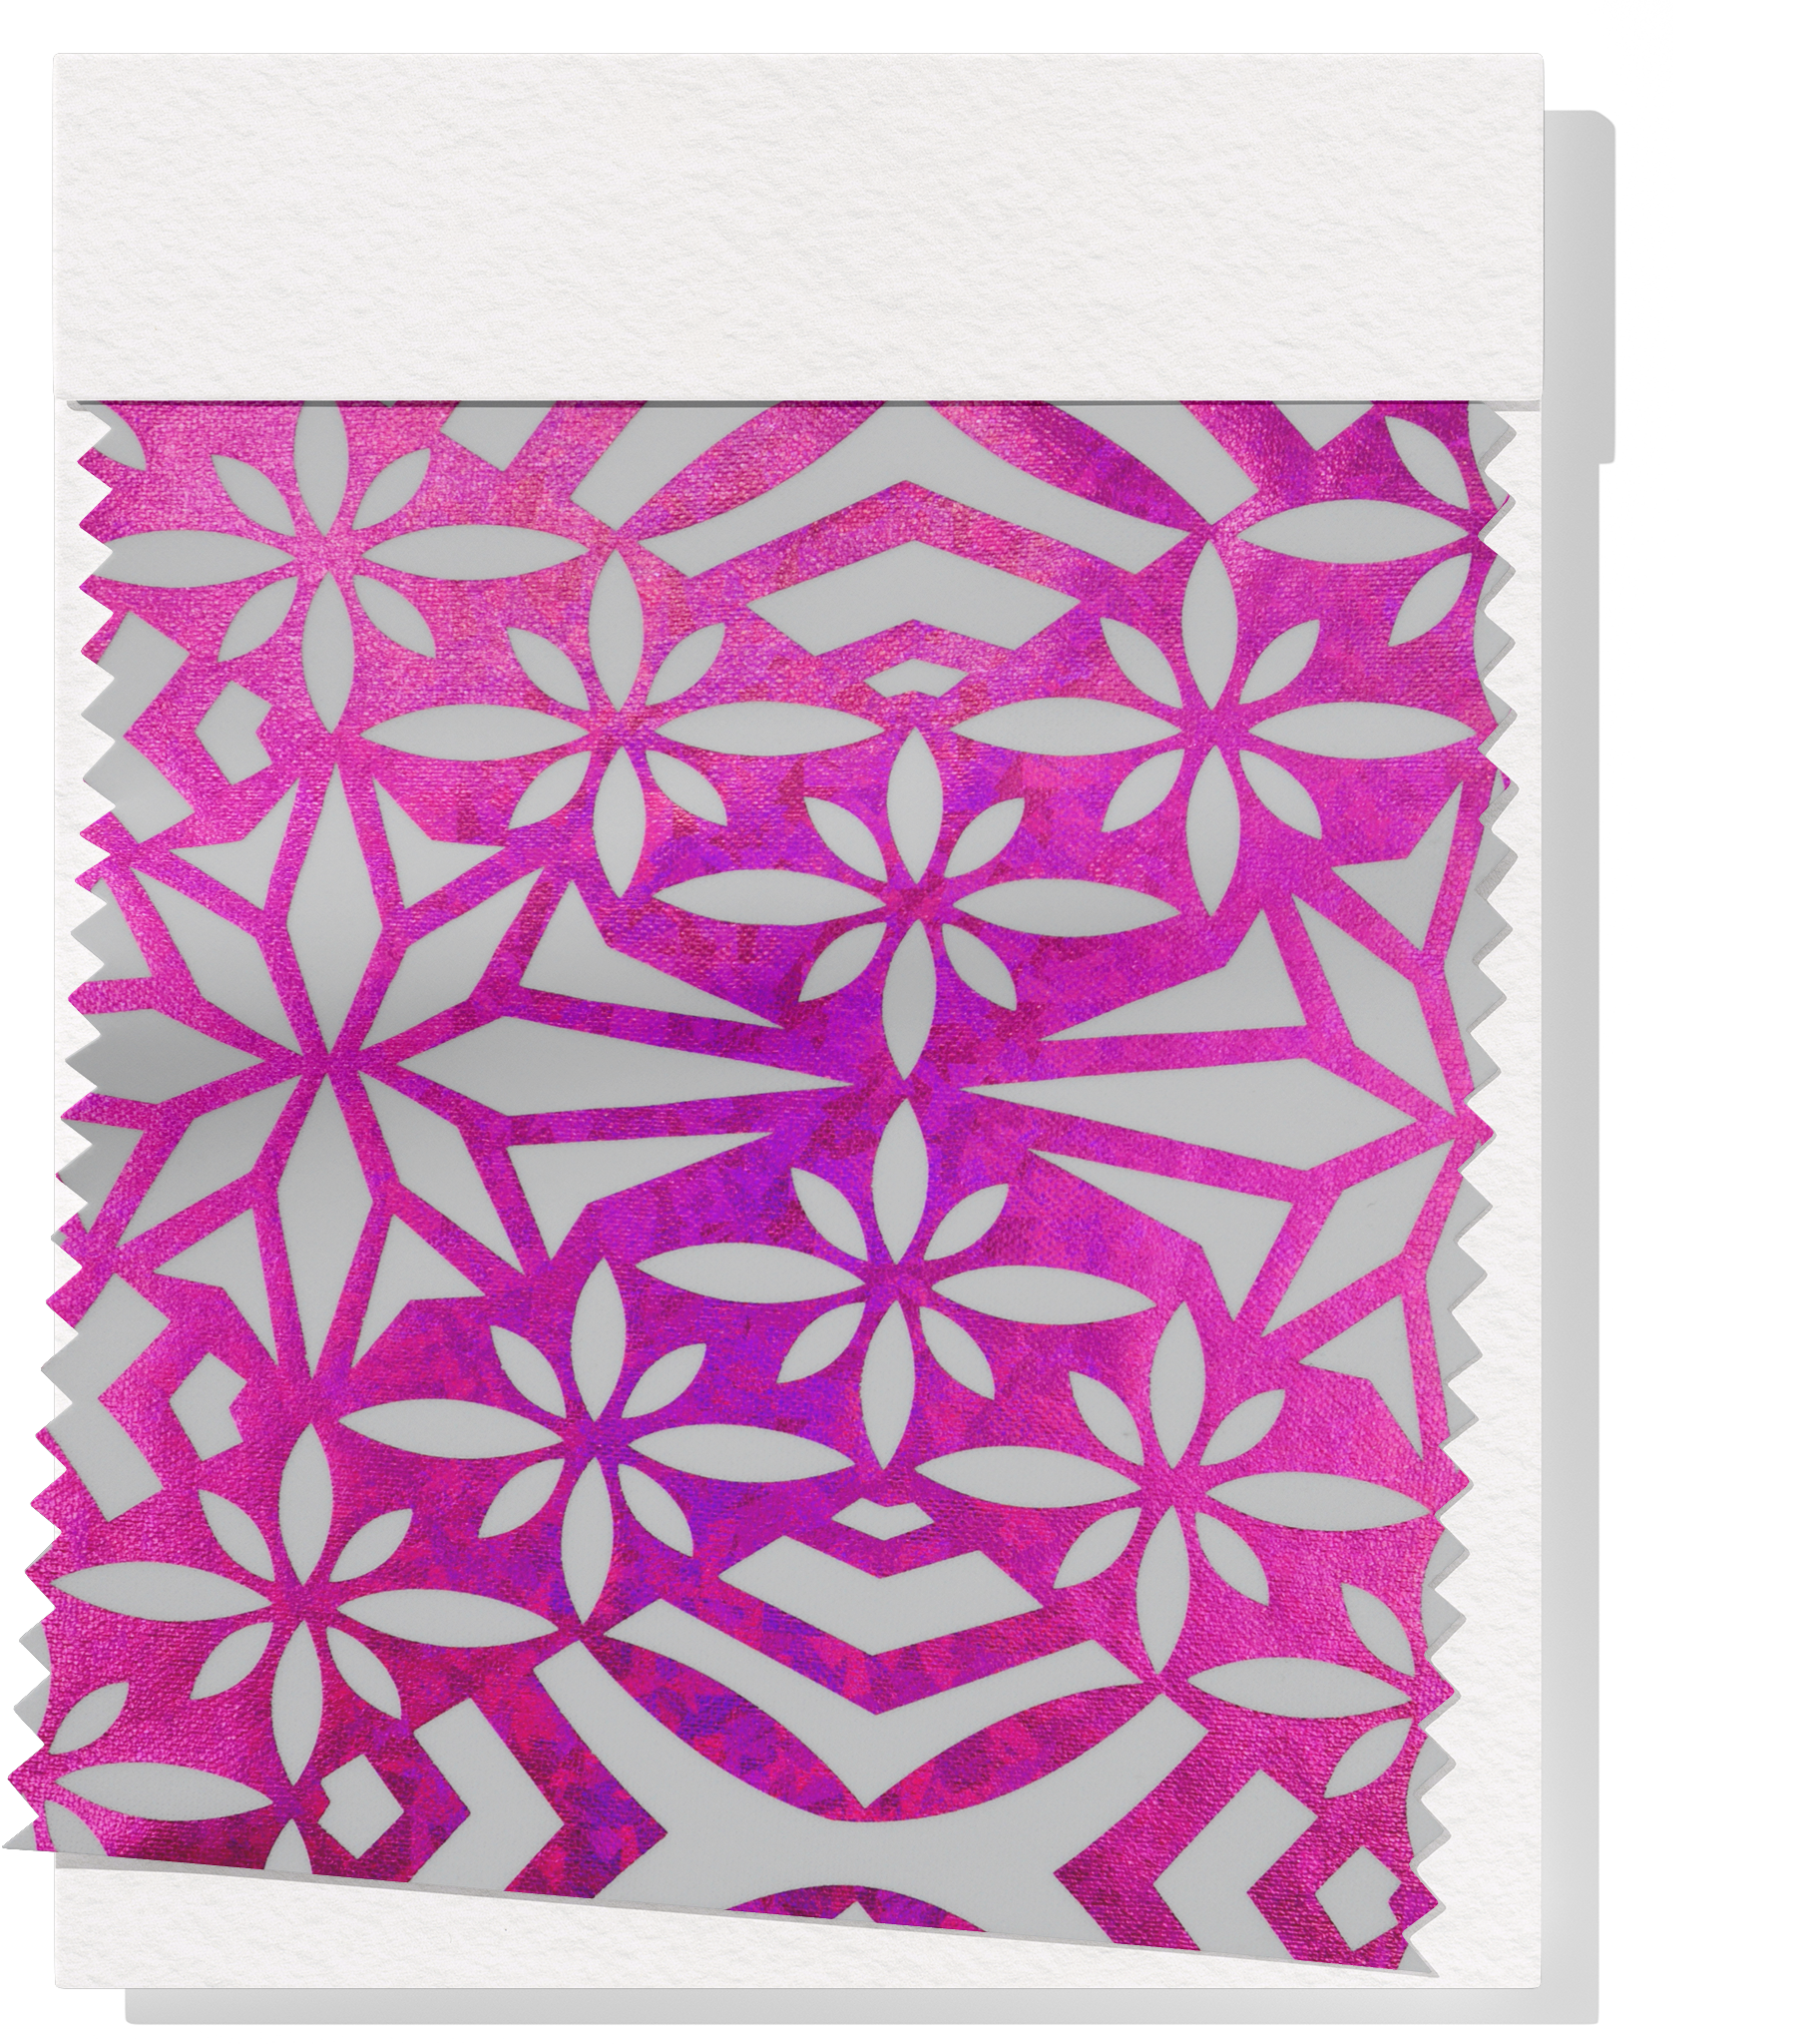 Stretch Polyester Pacific Print $12.00p/m Design #3- White & Pink